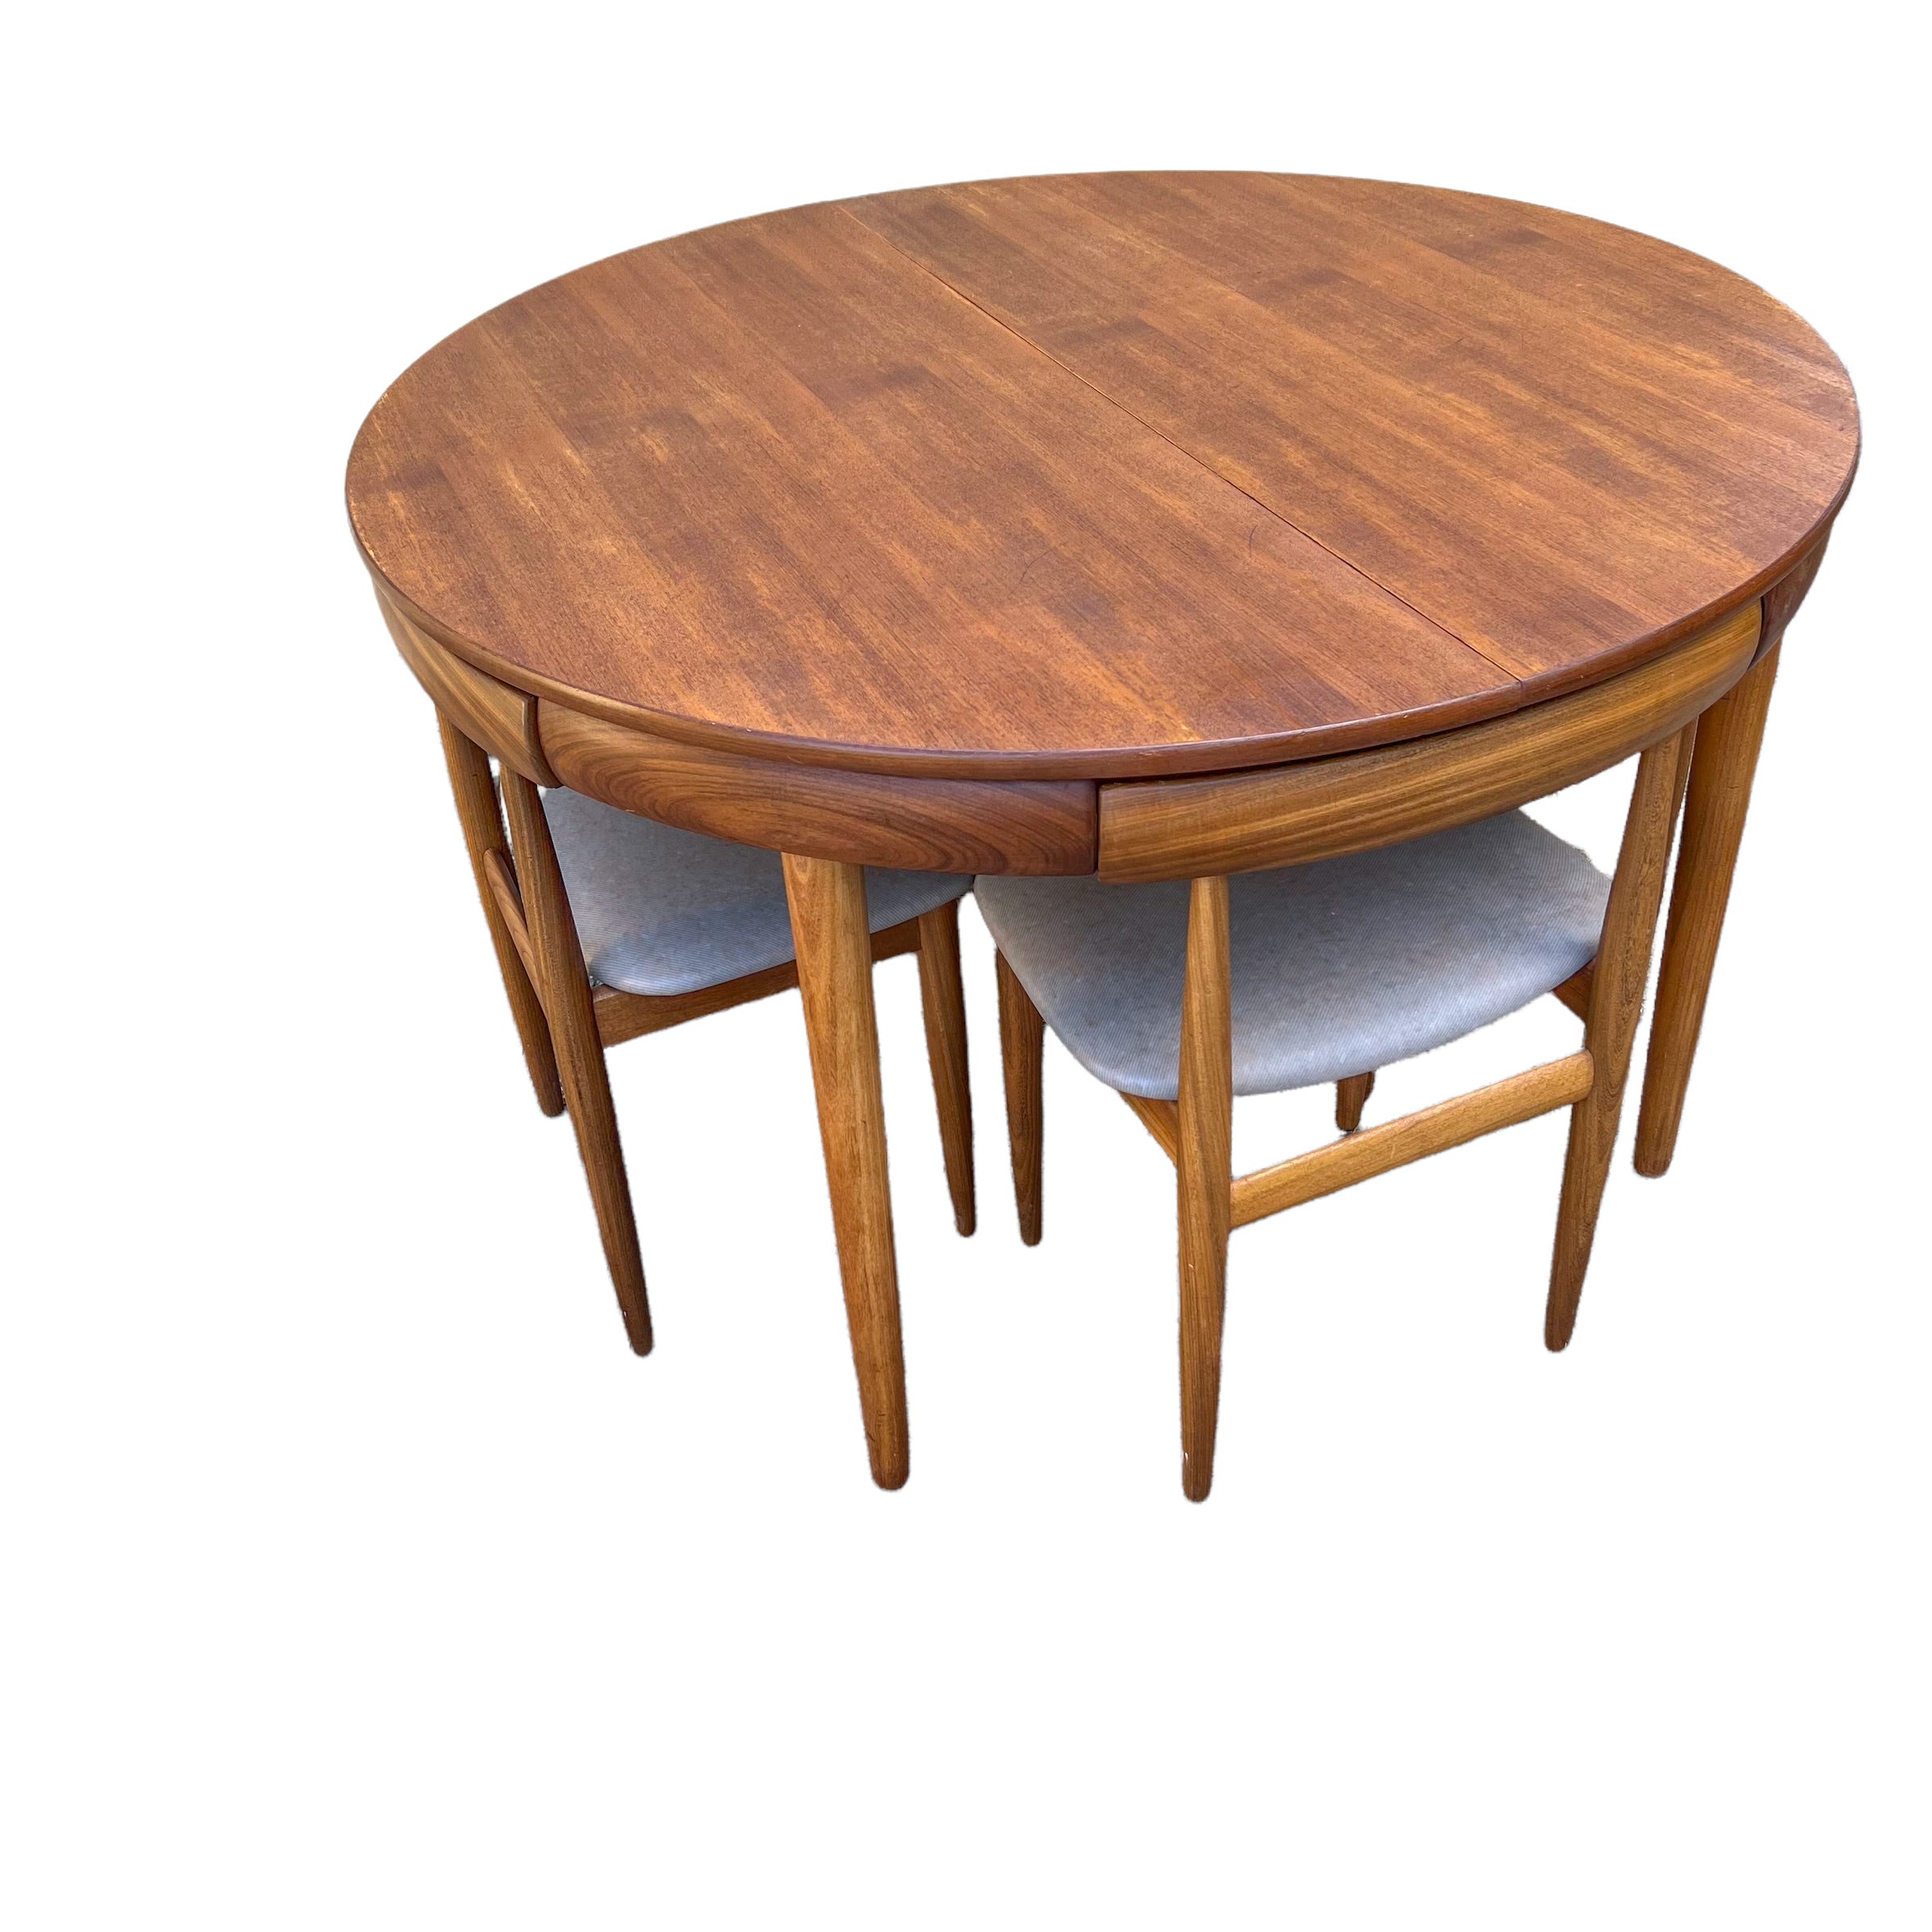 Stunningly designed table and chairs by Hans Olsen for Frem Røjle Møblefabrik made in 1953. The set consists of teak wood and comes with 4 chairs that disappear from the table in the apron, making them invisible and occupying a modest space. The